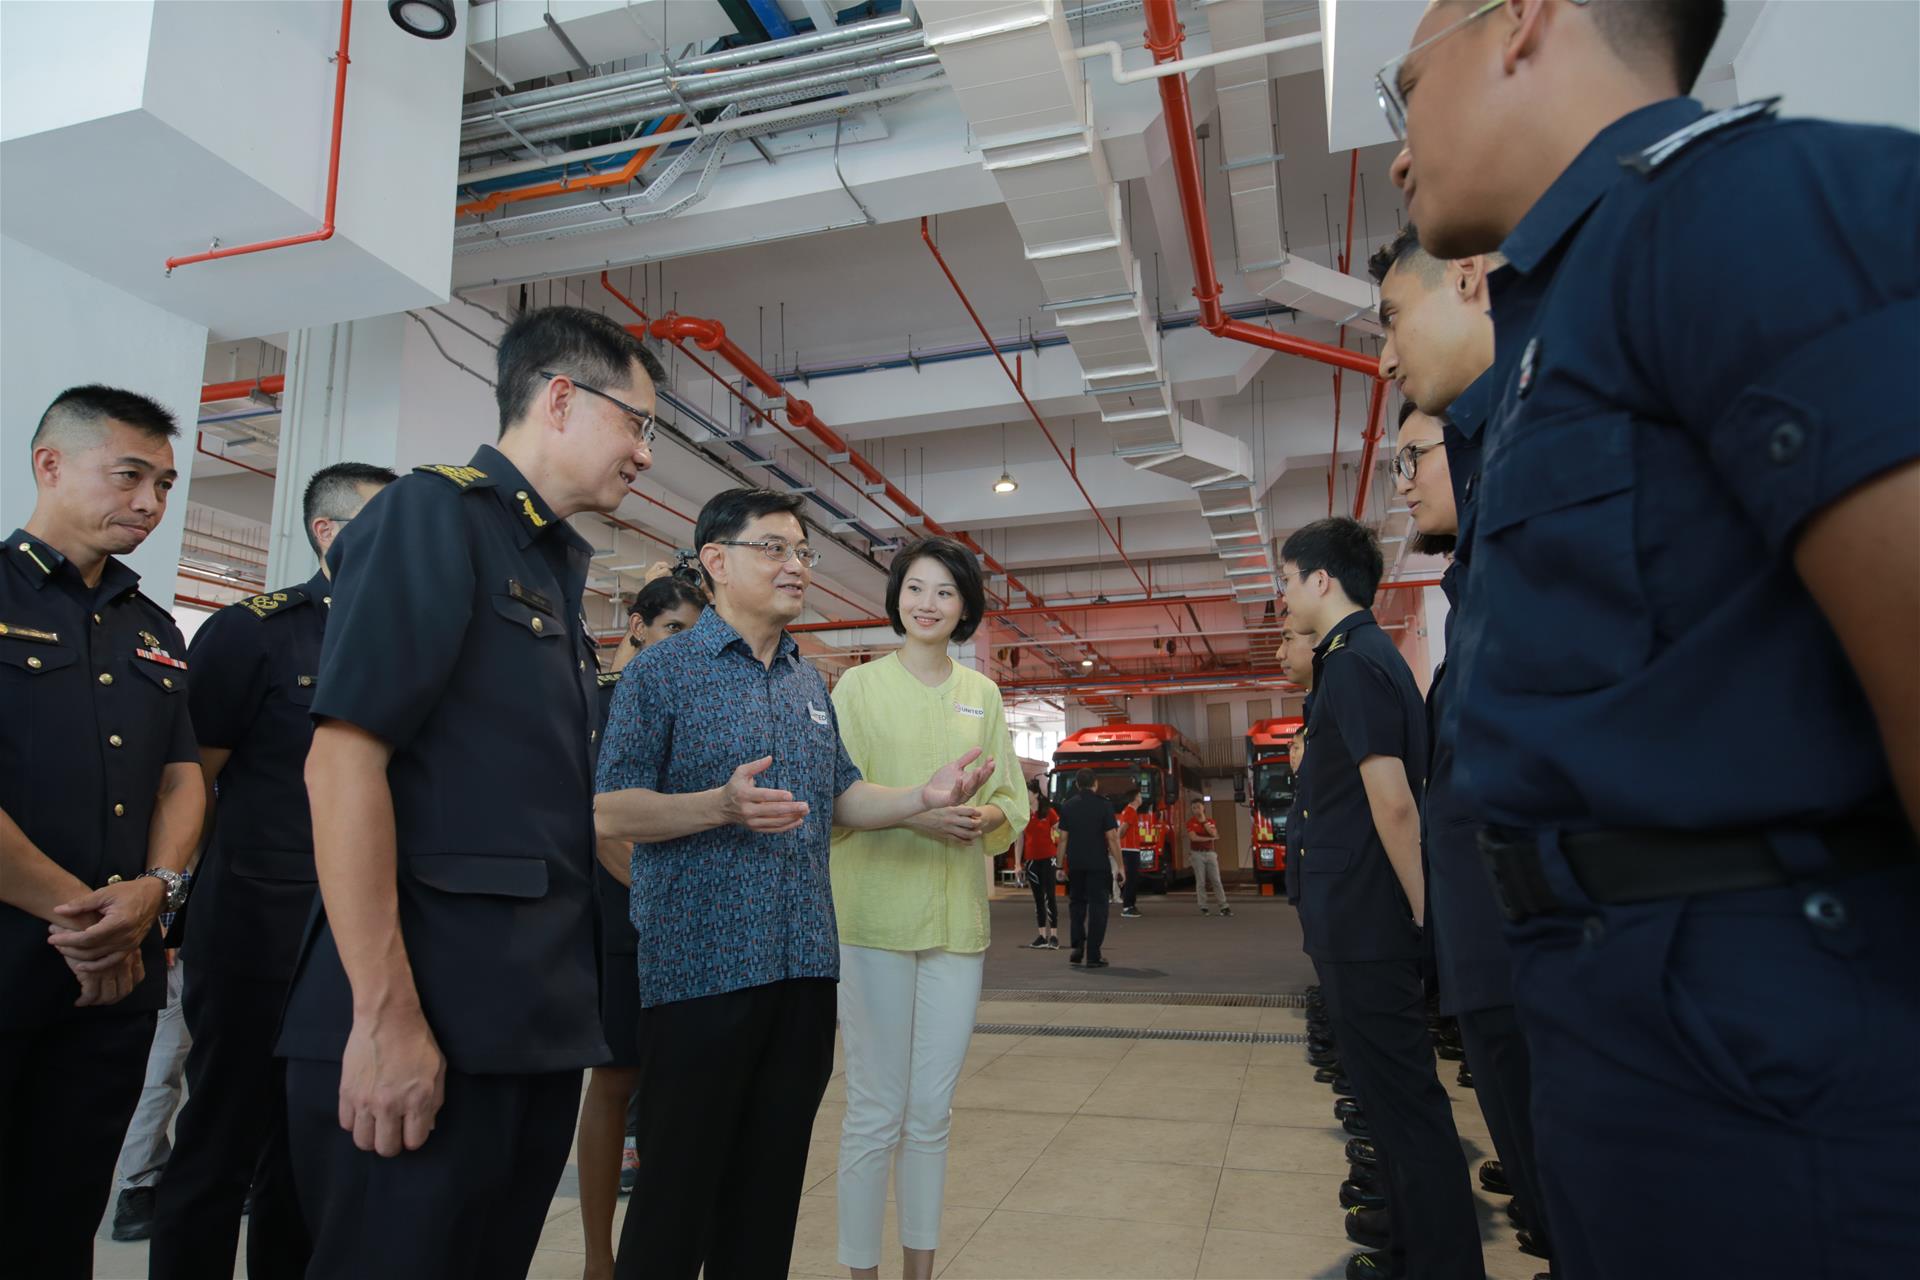 Mr Heng Swee Keat, Deputy Prime Minister and Minister for Finance interacted with the SCDF personnel who have been deployed at the frontline since the start of the COVID-19 outbreak.